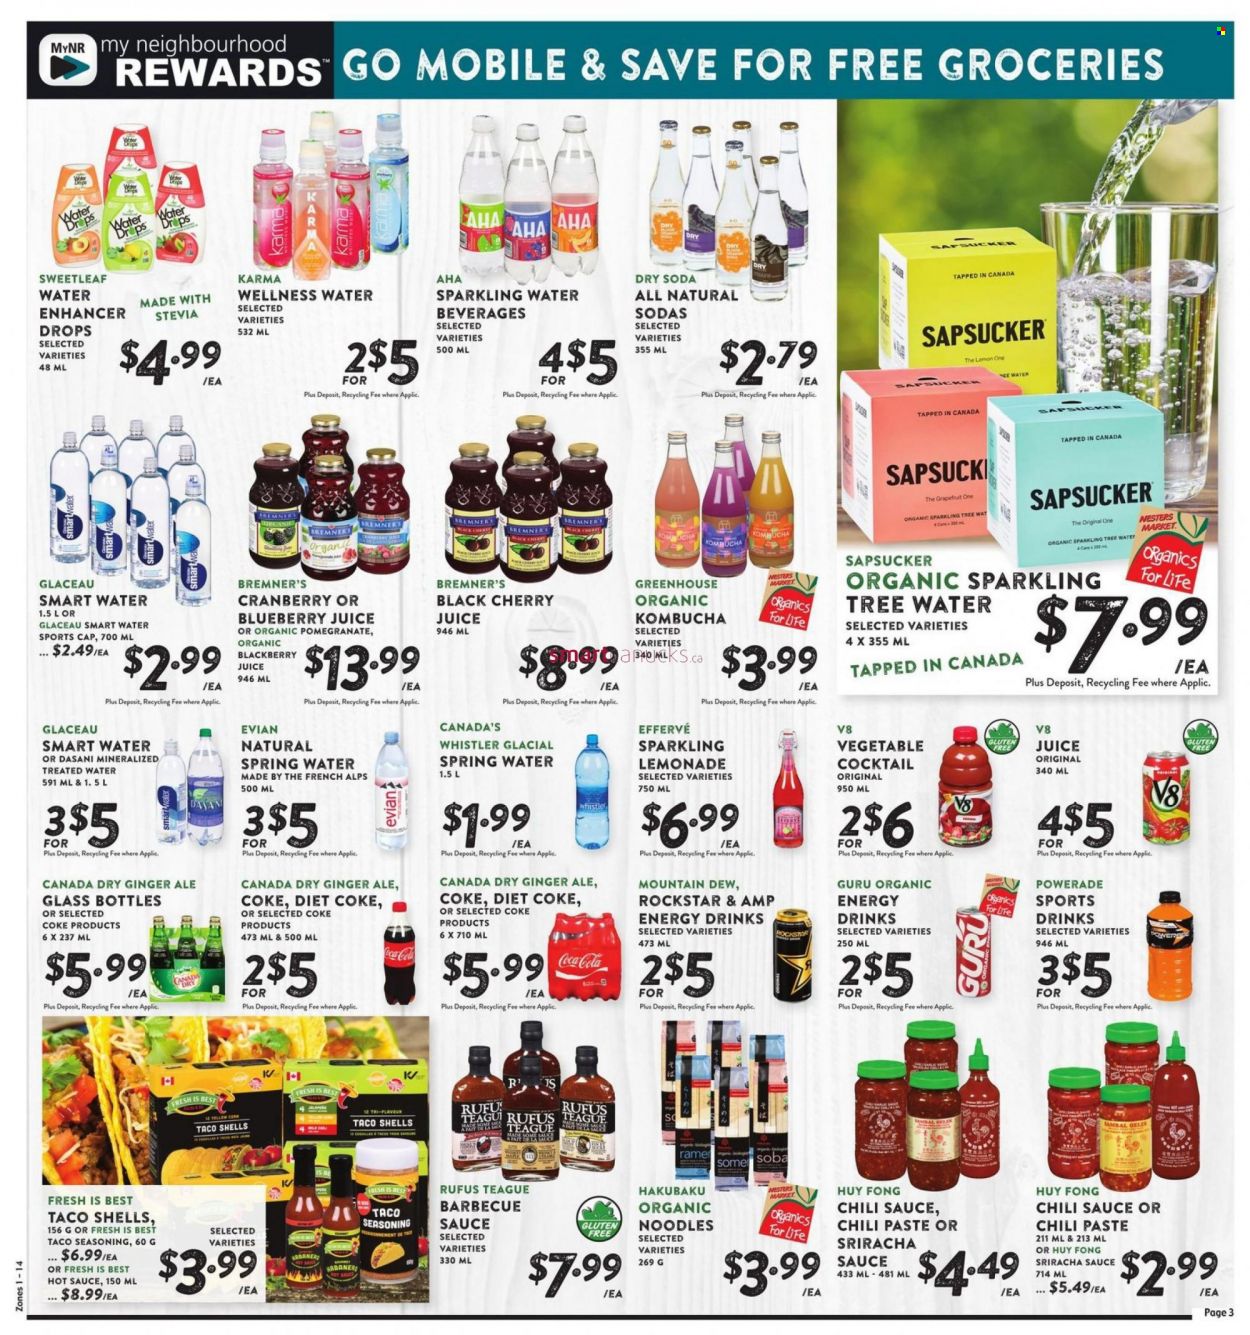 thumbnail - Nesters Food Market Flyer - April 24, 2022 - May 21, 2022 - Sales products - grapefruits, cherries, pomegranate, noodles, malt, stevia, spice, BBQ sauce, sriracha, hot sauce, chilli sauce, Rufus Teague, Canada Dry, Coca-Cola, ginger ale, lemonade, Mountain Dew, Powerade, cherry juice, juice, energy drink, Diet Coke, Rockstar, spring water, soda, sparkling water, Smartwater, Evian, kombucha. Page 3.